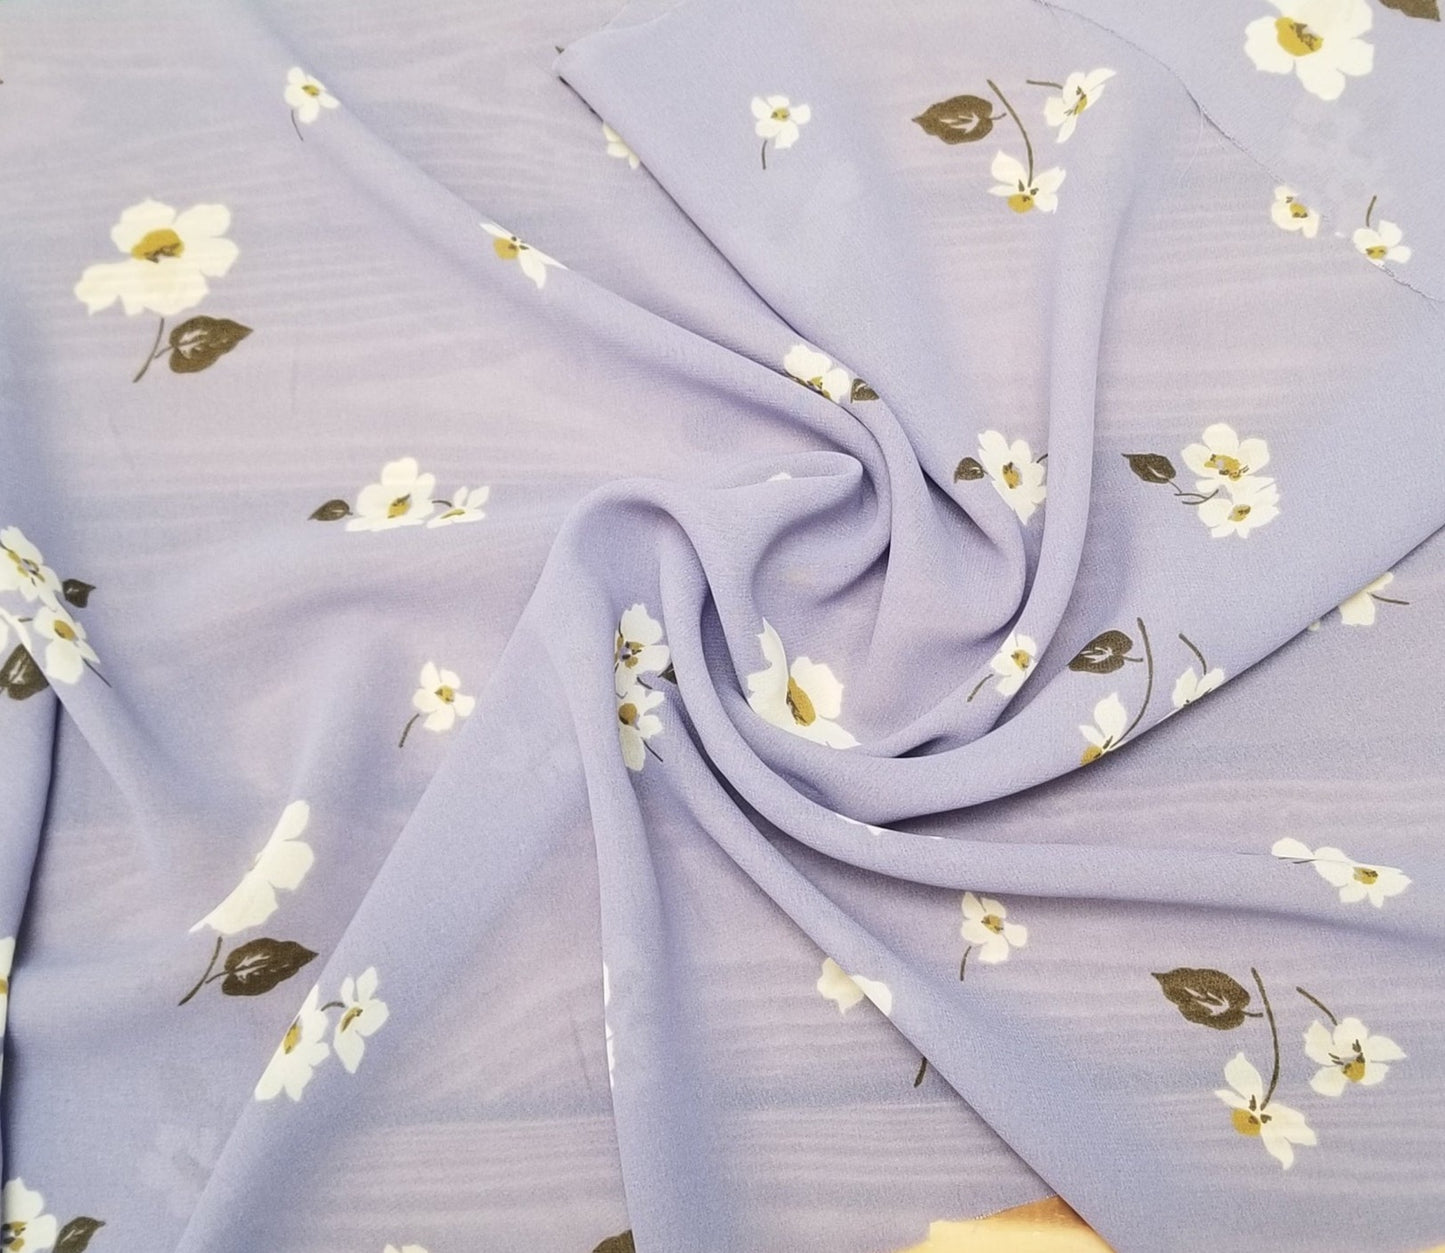 Designer Deadstock Rayon Georgette Sheer Lilac Daisy Floral Woven- By the yard